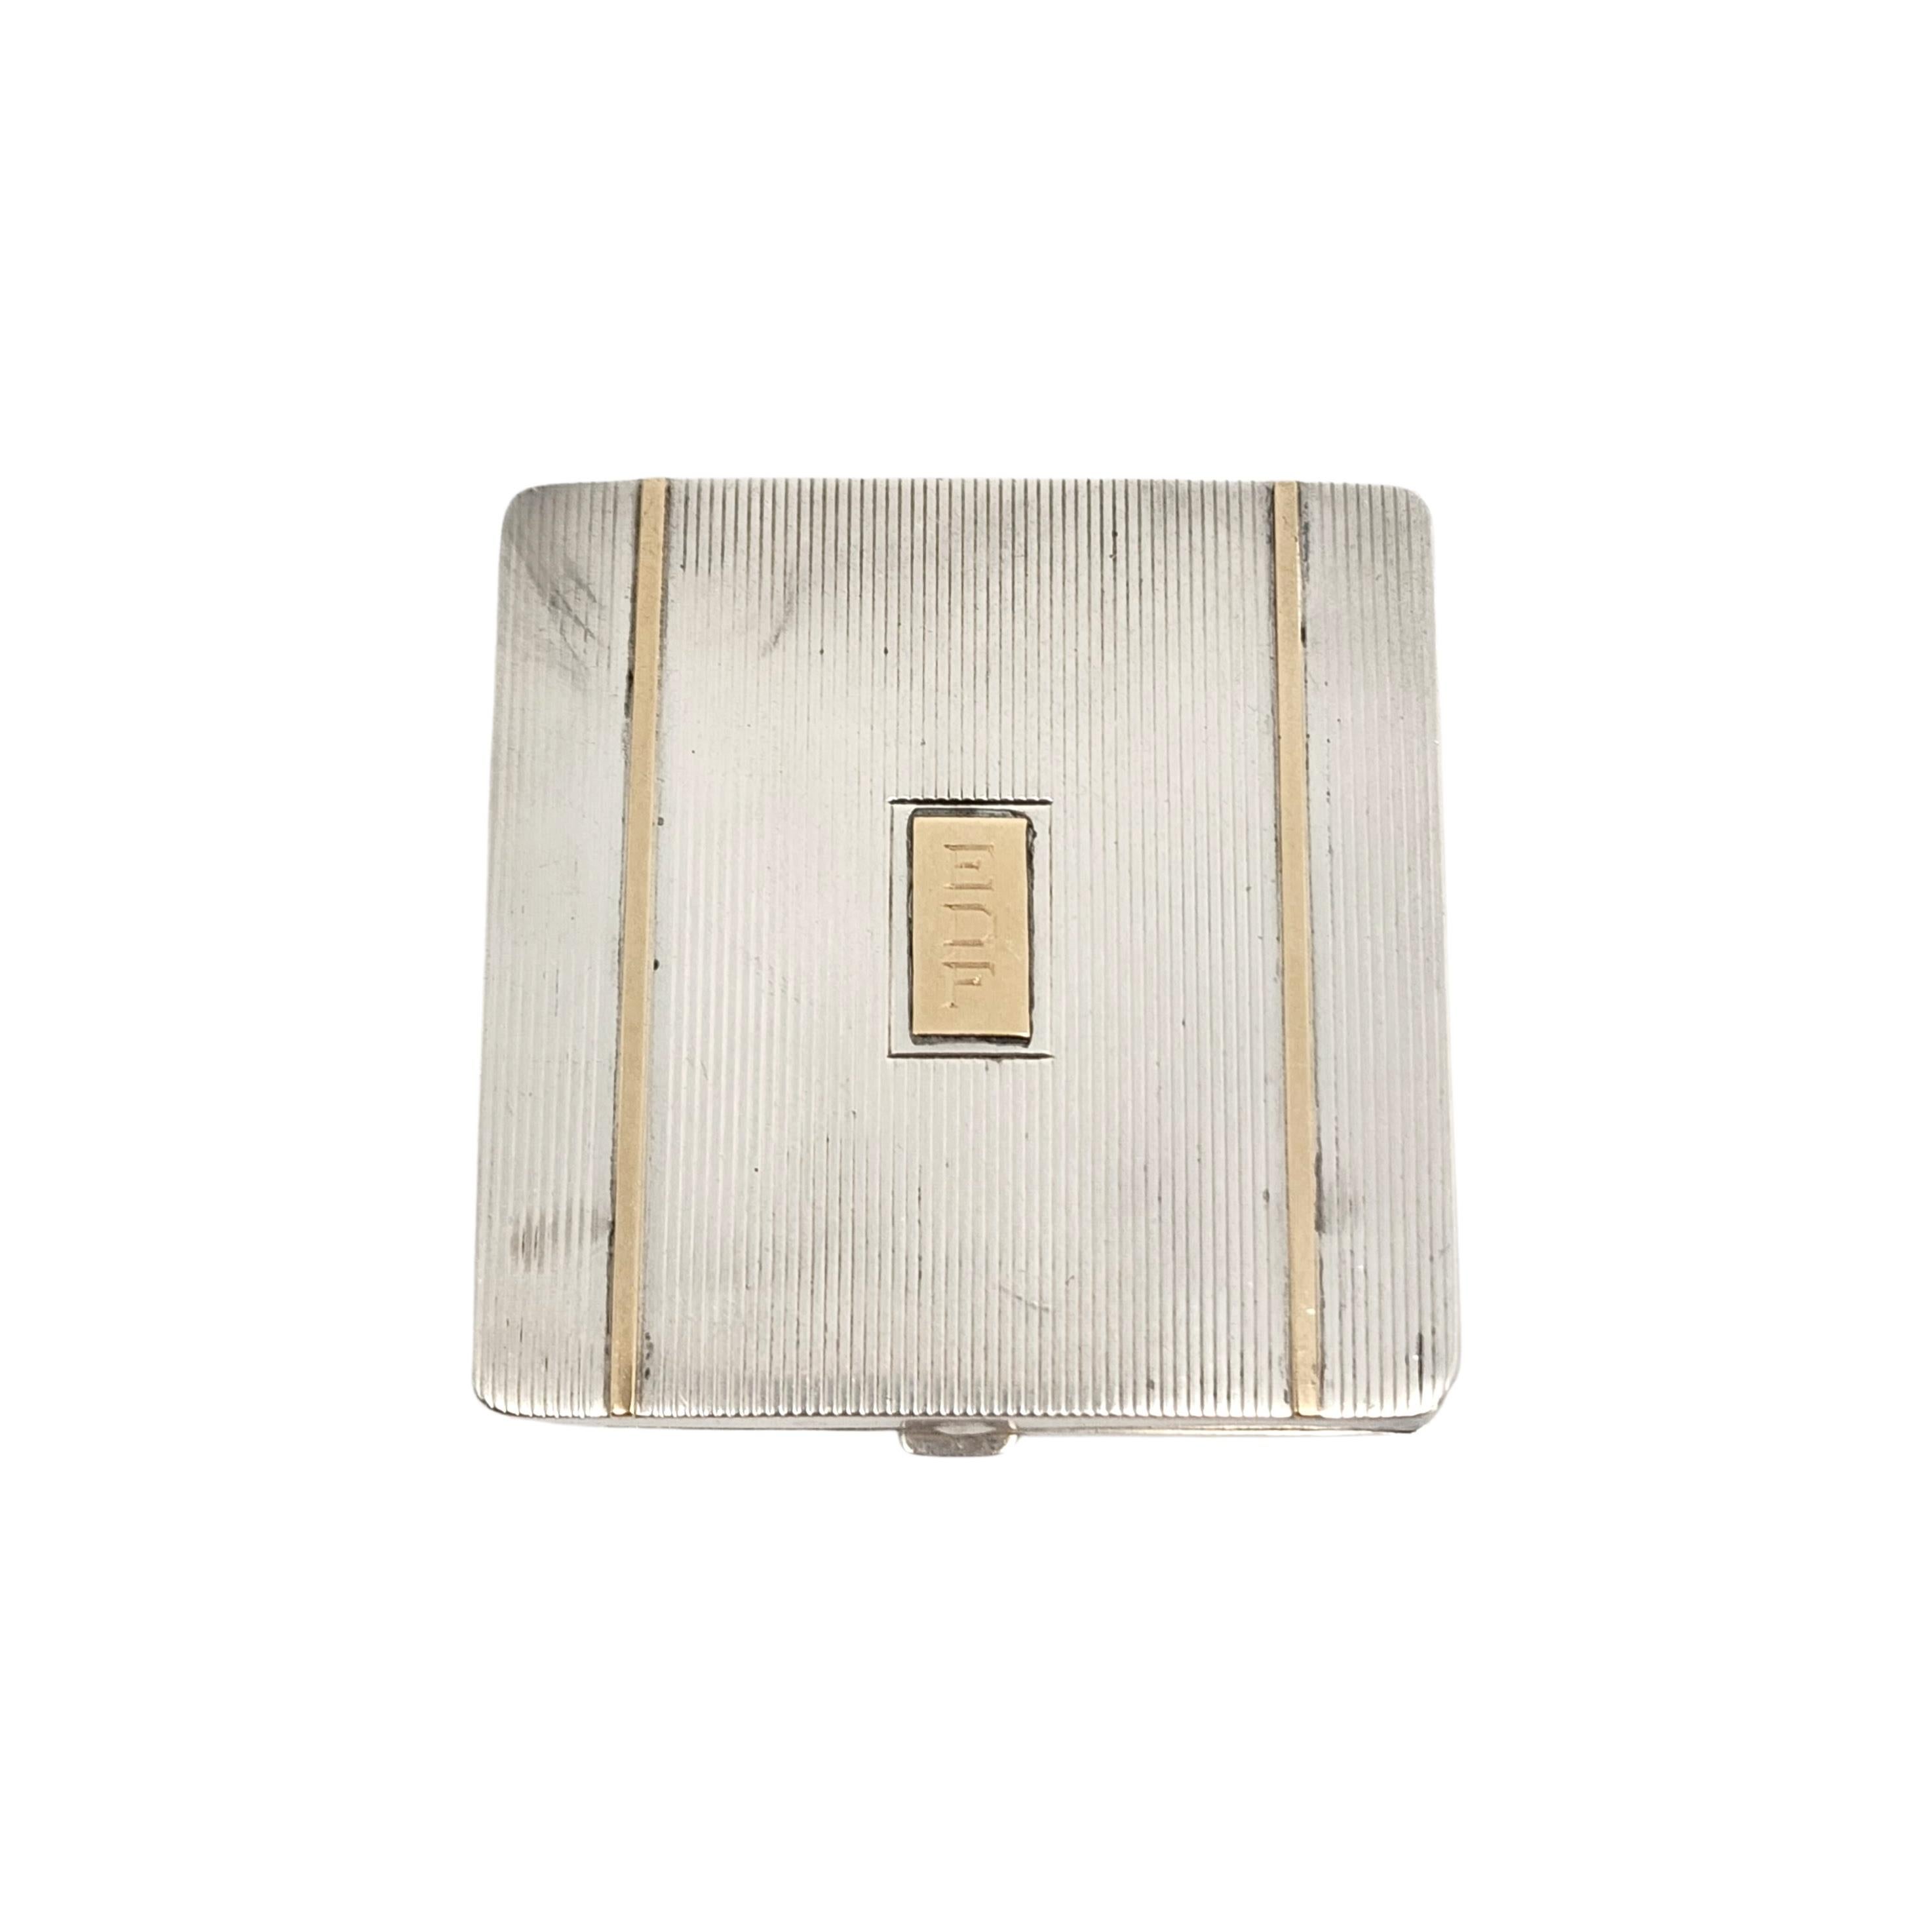 Vintage sterling silver with 14K Gold Plate square mirror compact by Watson Co with monogram.

Monogram appears to be EDF. Engraved inside MARCH 23-1938.

Beautiful etched line design with yellow gold plated applied stripe accents on both sides.